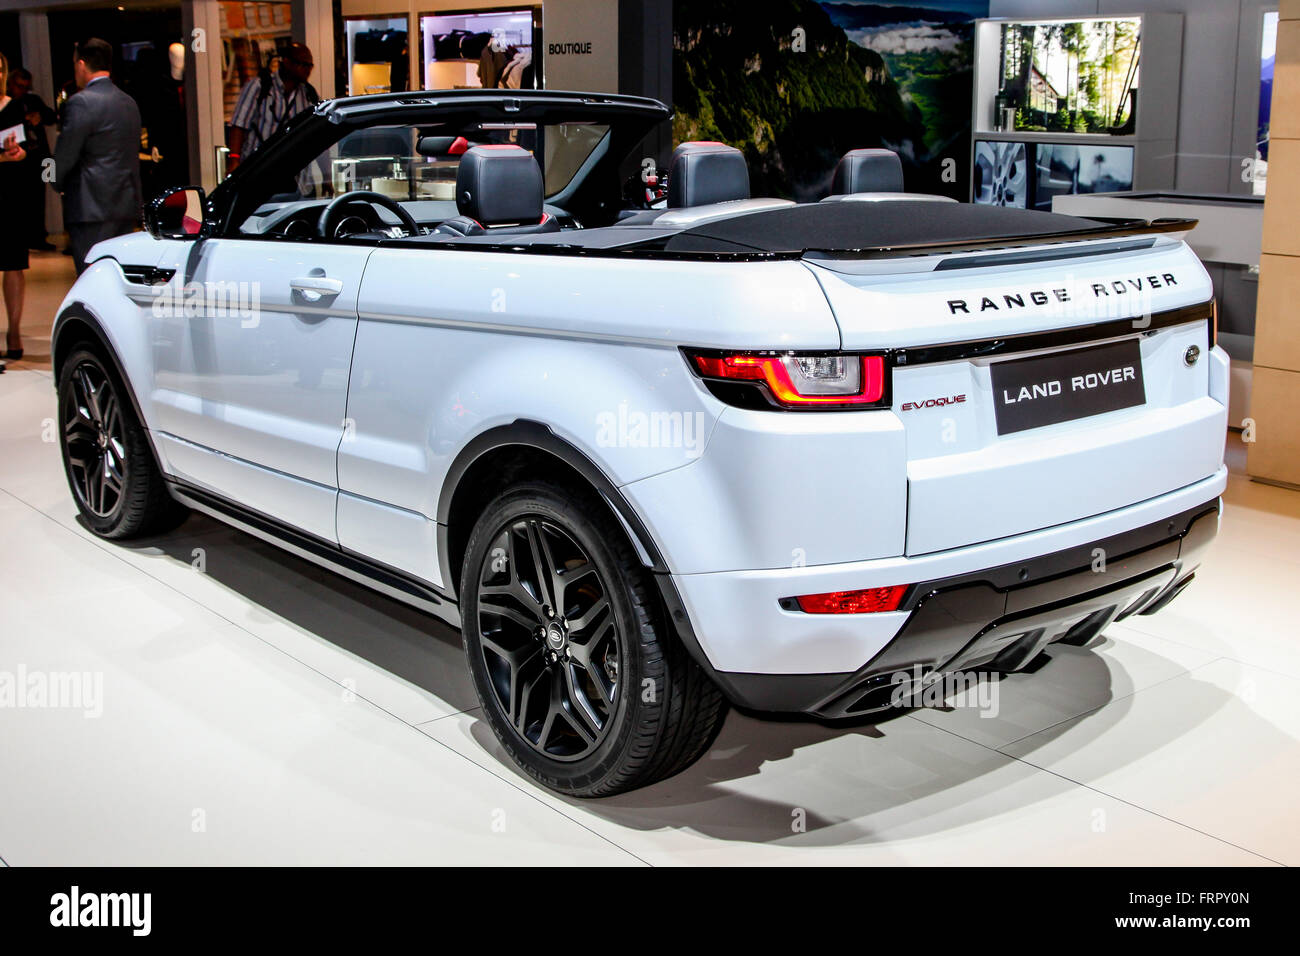 Manhattan, New York, USA. 23rd Mar, 2016. A Range Rover,  Land Rover Evoque shown at the New York International Auto Show 2016, at the Jacob Javits Center. This was Press Preview Day. Stock Photo